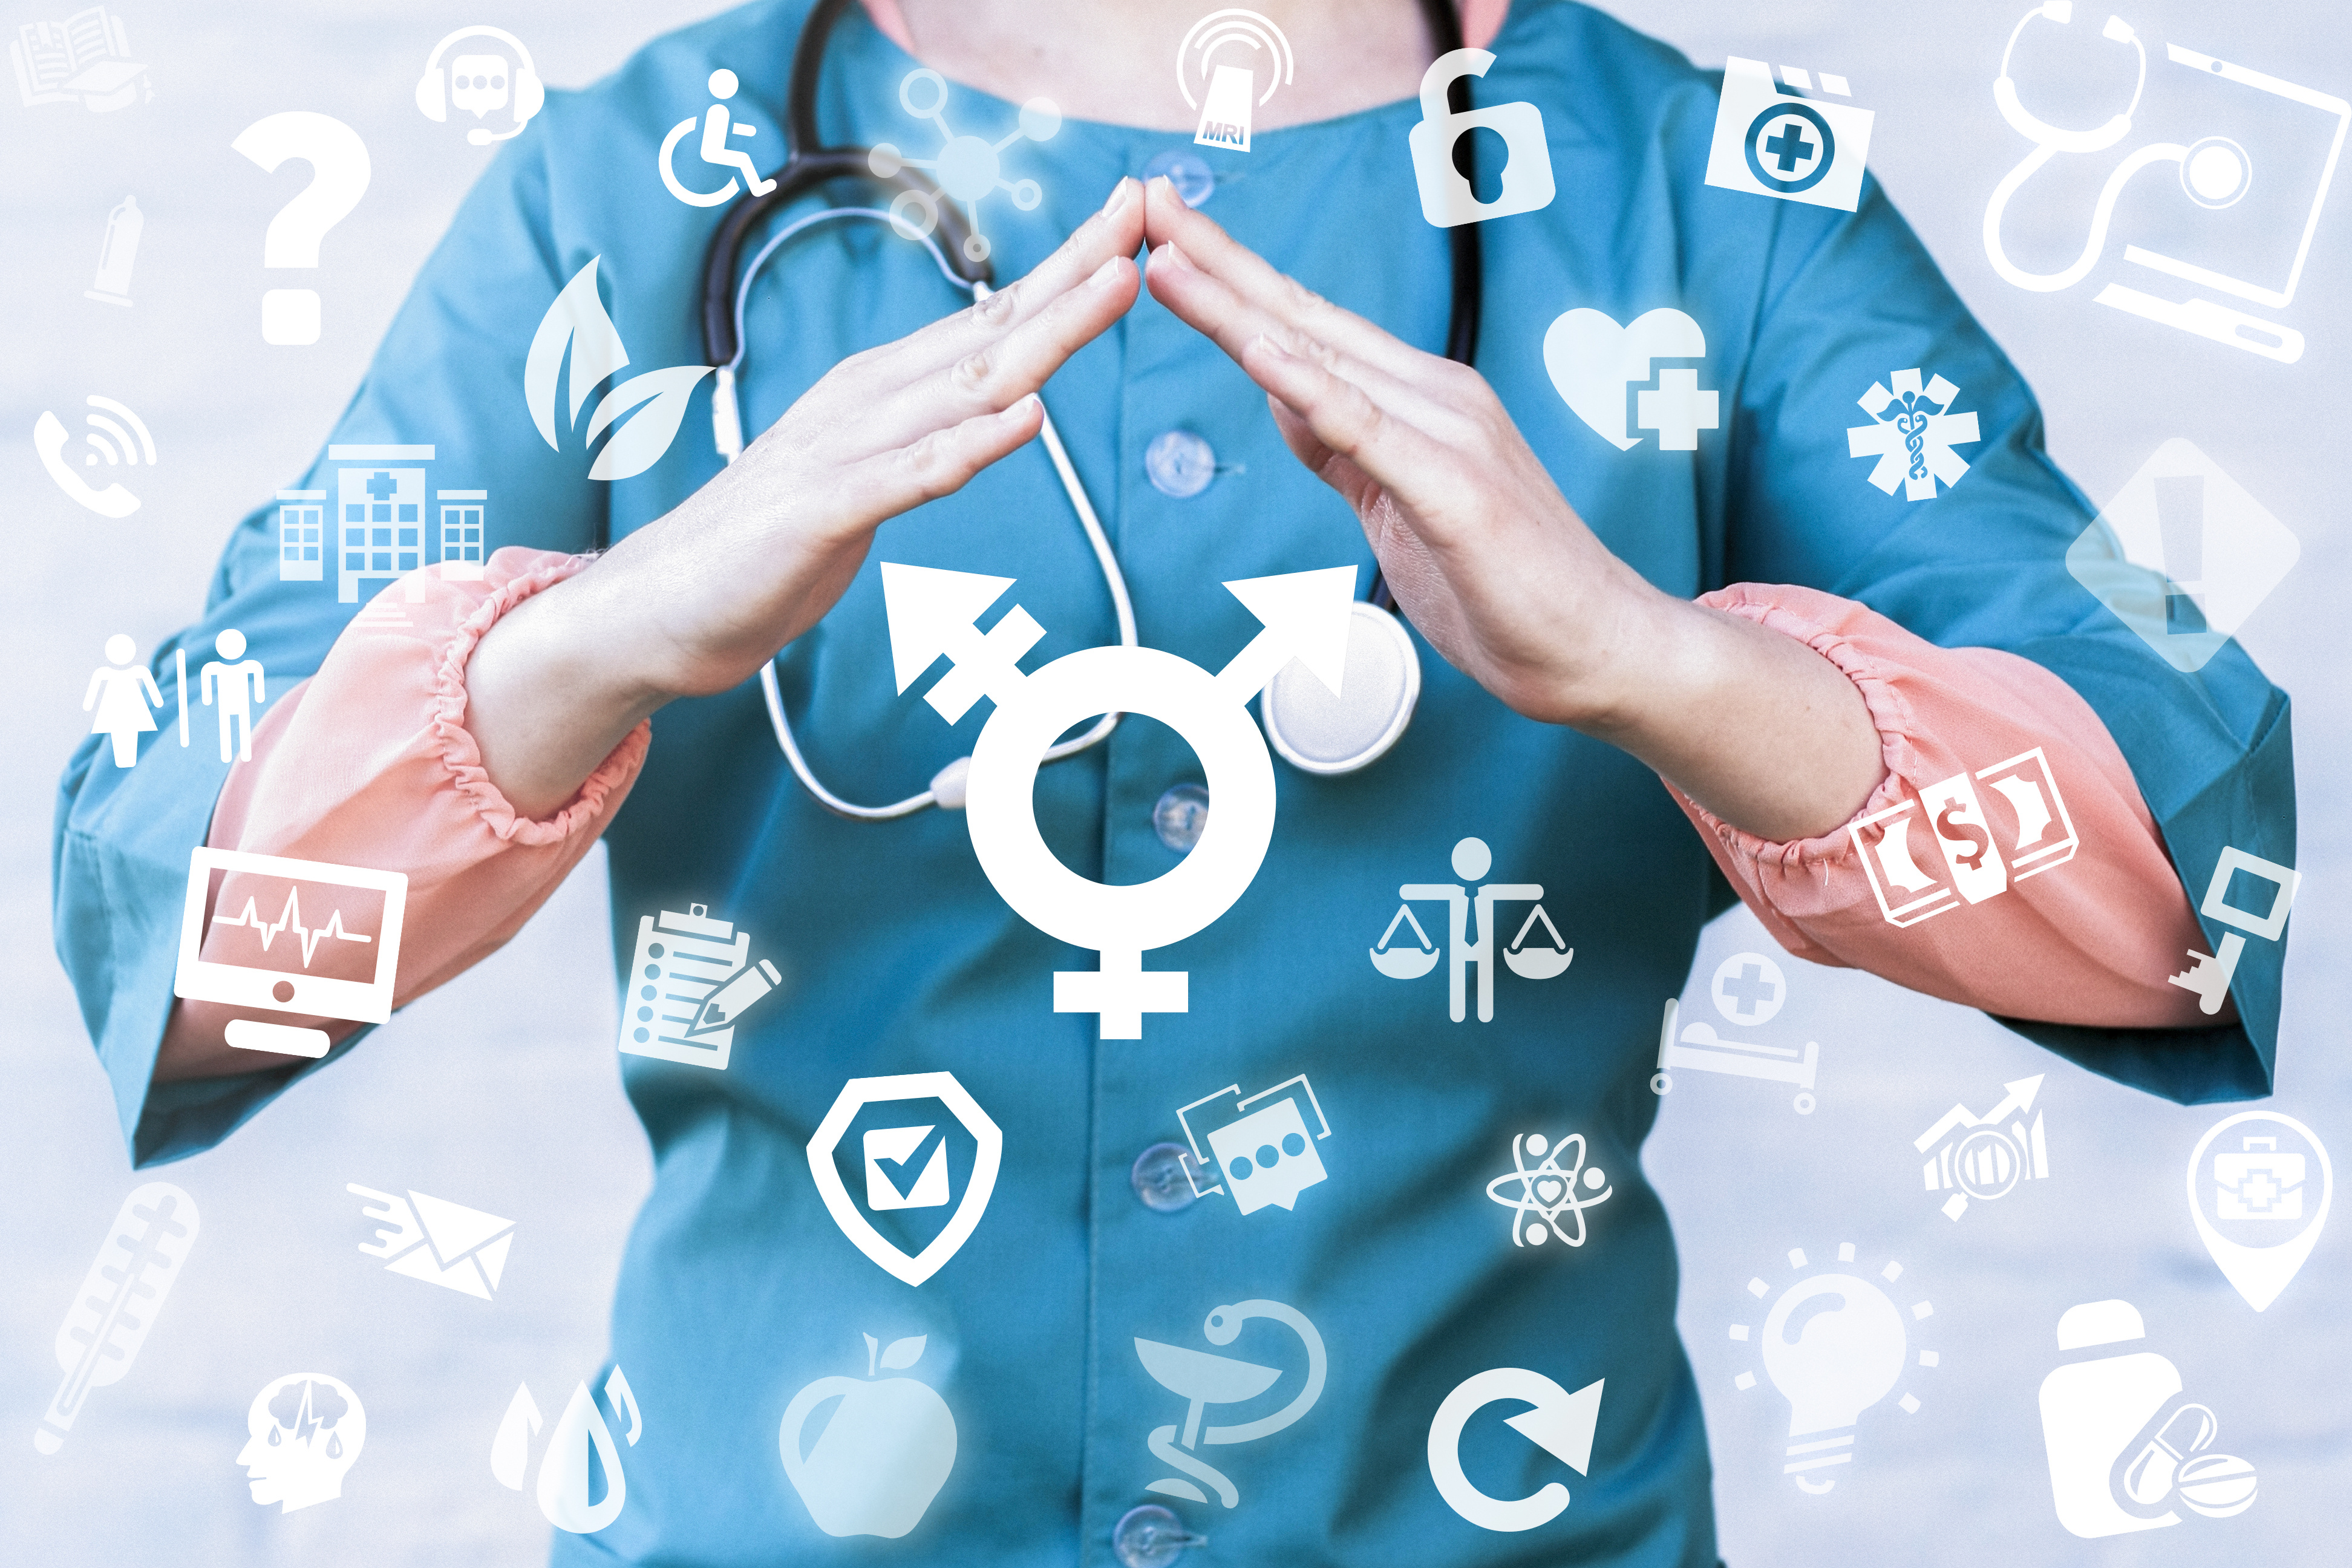 Doctor is holding roof hands over transgender (combining gender) symbol on a virtual digital screen interface